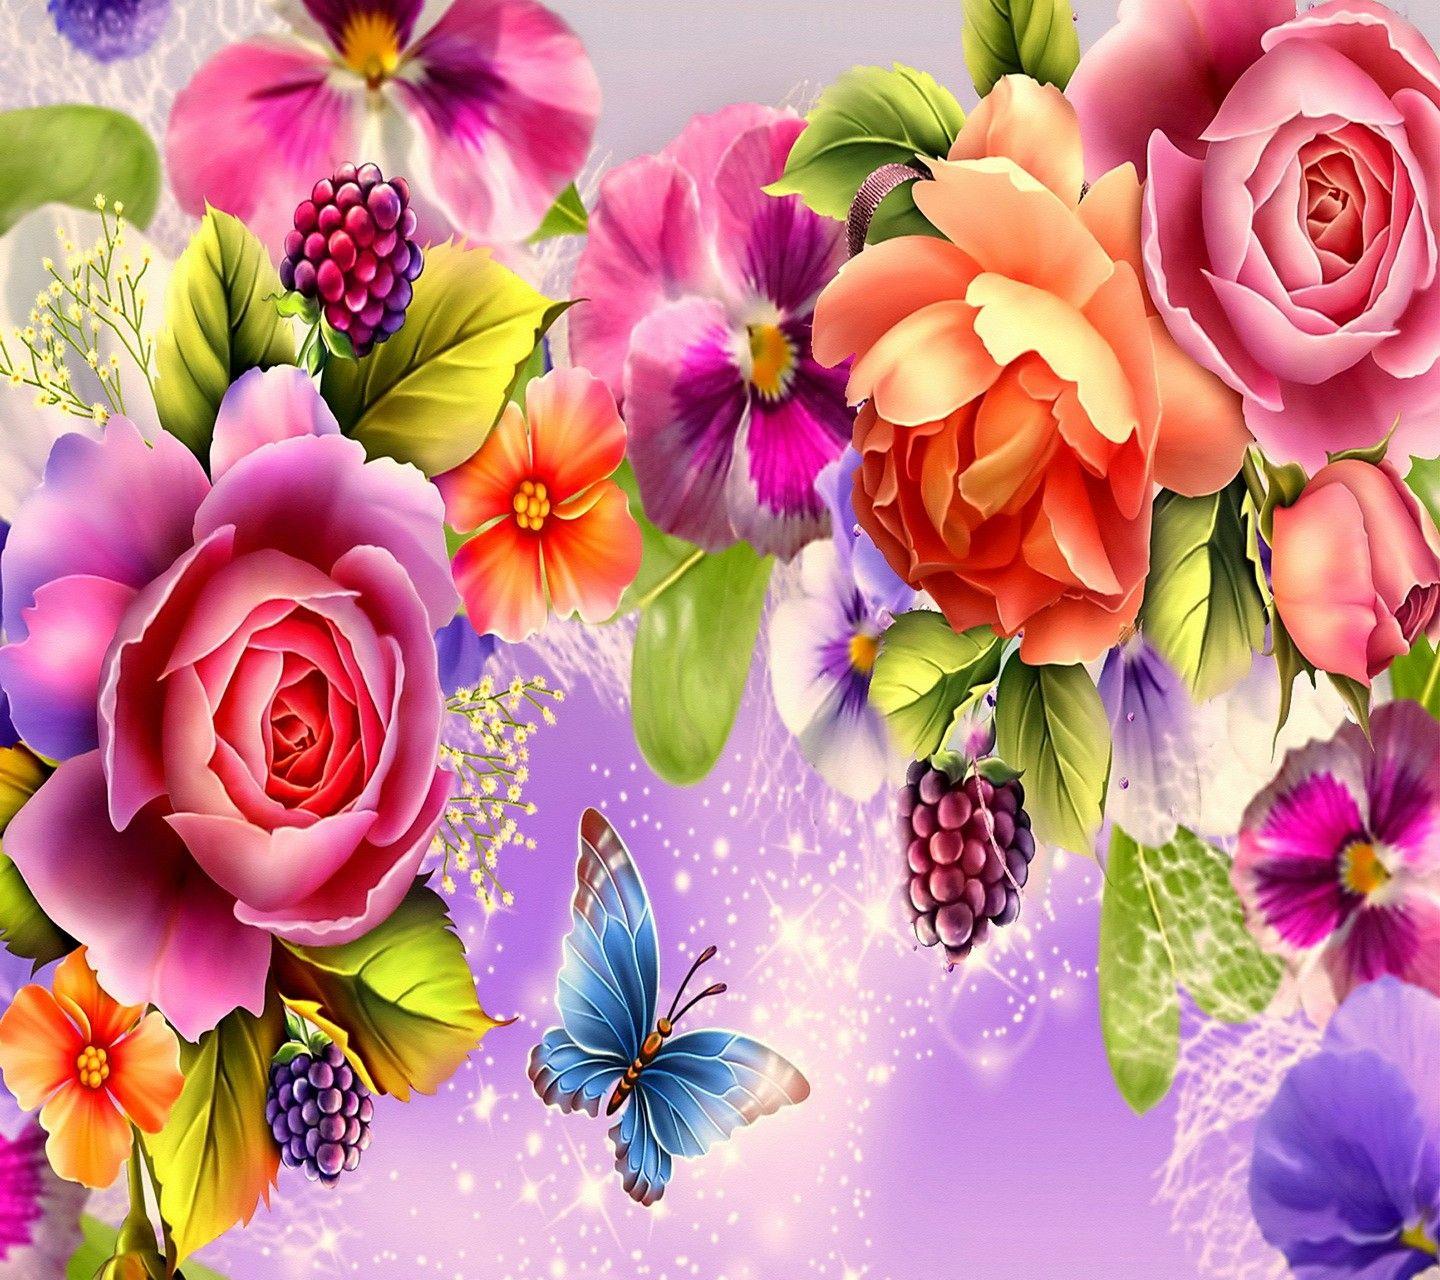 Pink Roses and Butterfly Wallpapers - Top Free Pink Roses and Butterfly ...